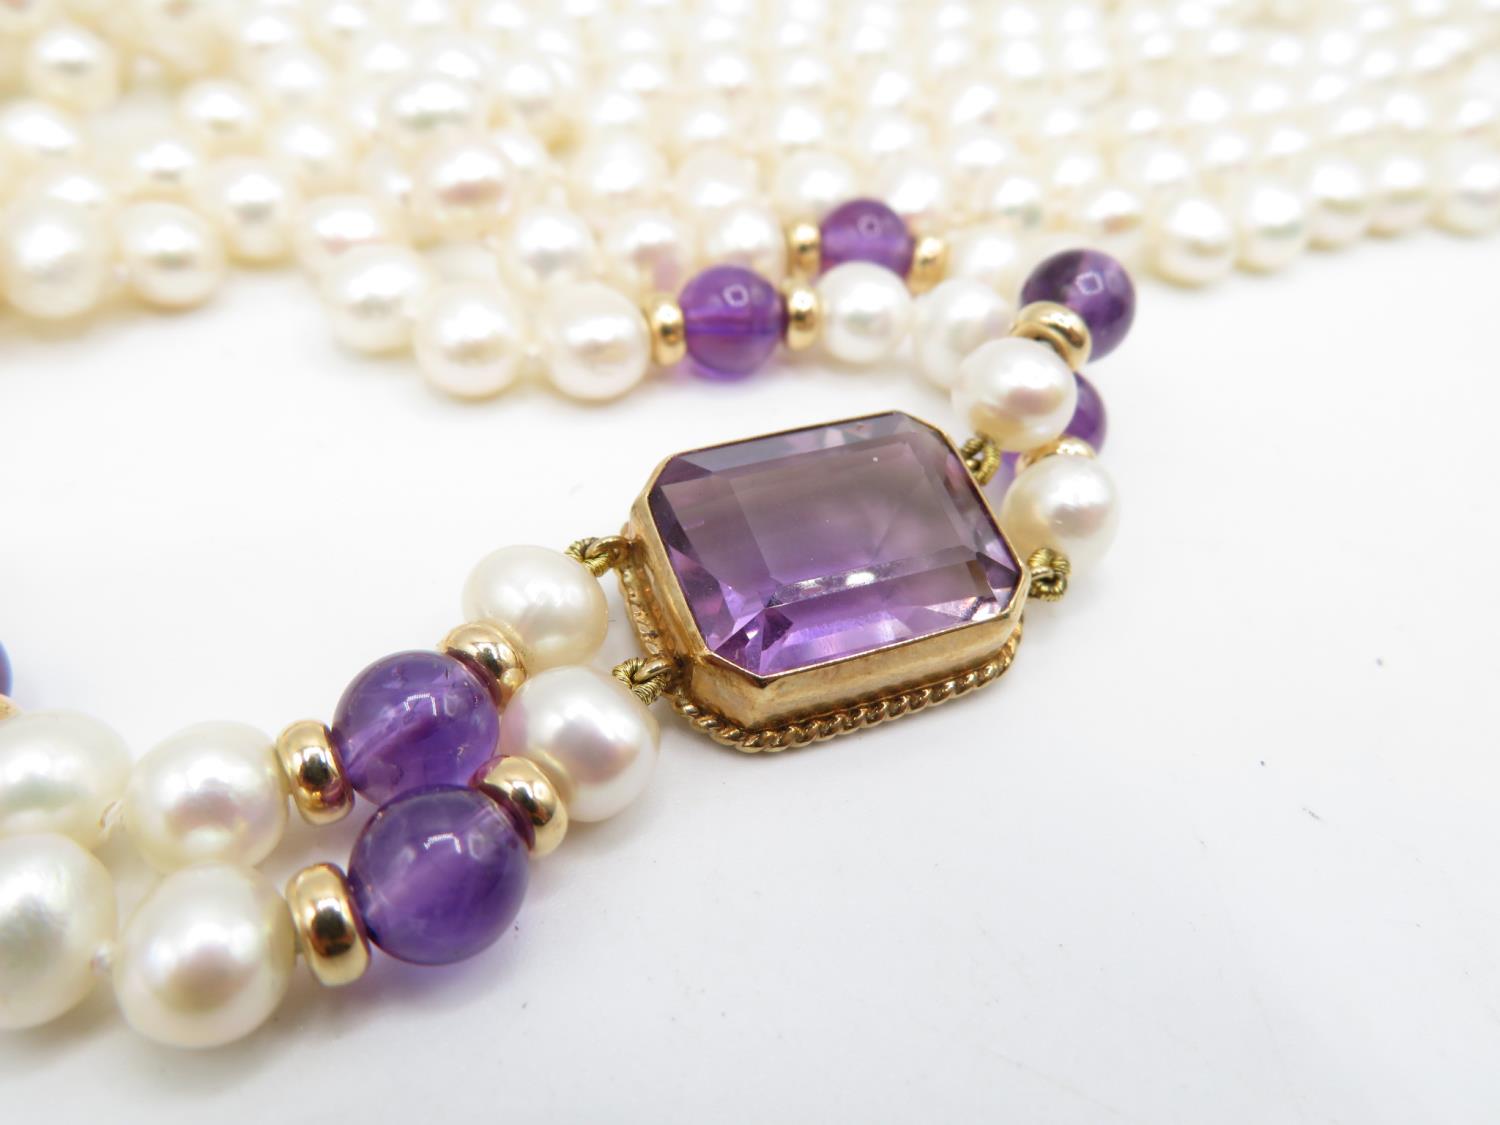 9ct gold amethyst and cultured pearl double strand Art Deco Revival Flapper necklace 32" long - Image 3 of 3